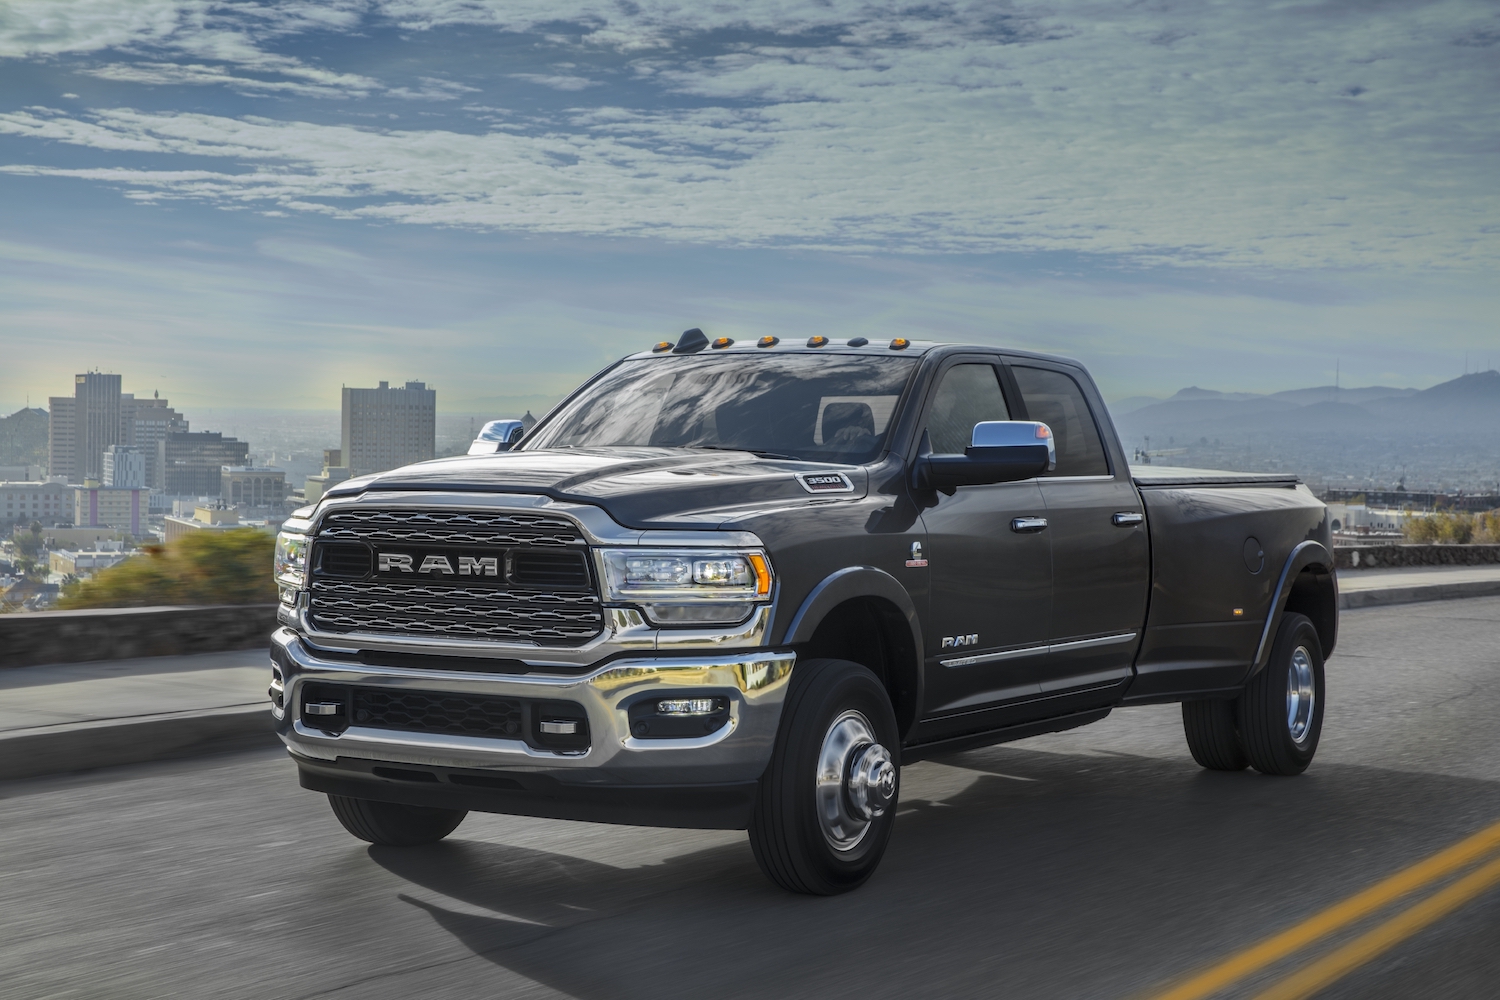 2021 Ram 3500 Heavy Duty Limited Crew Cab Dually driving